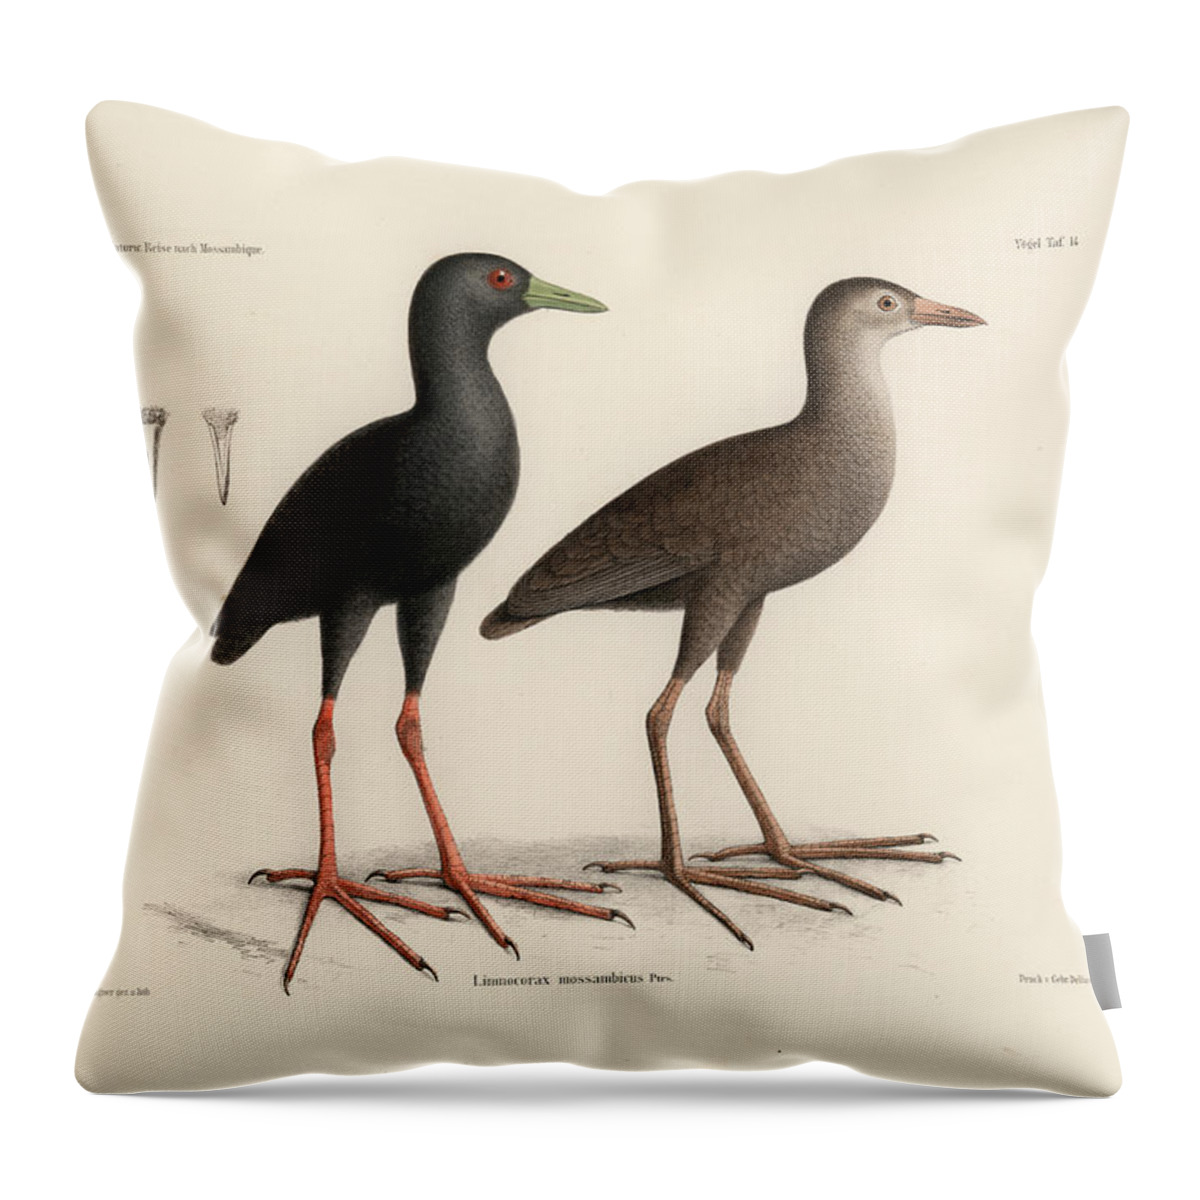 Black Crake Throw Pillow featuring the drawing Black Crake, Zapornia flavirostra by J D L Franz Wagner